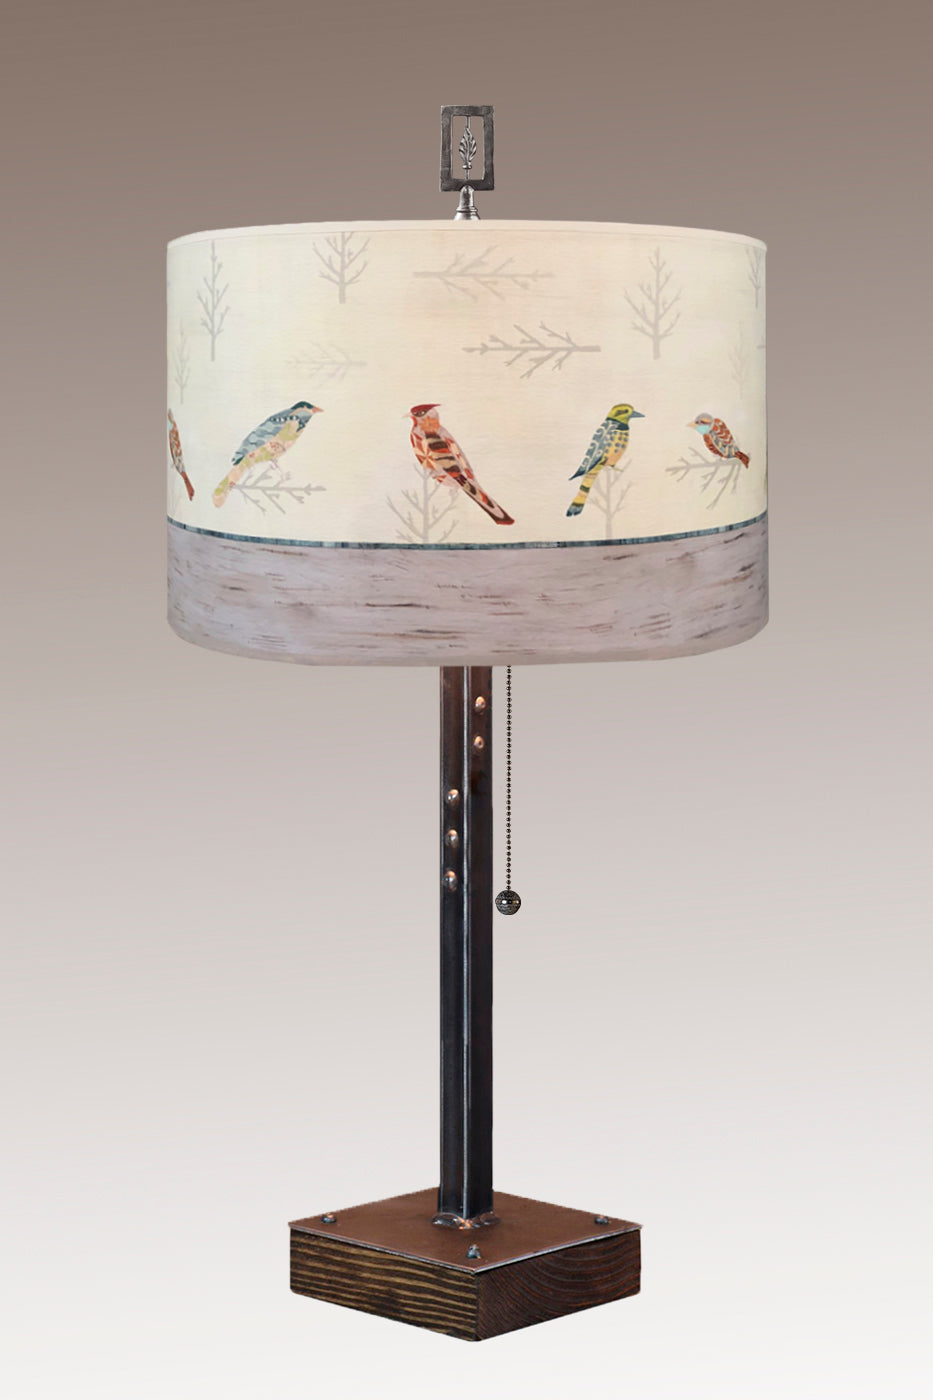 Janna Ugone & Co Table Lamps Steel Table Lamp on Wood with Large Drum Shade in Bird Friends